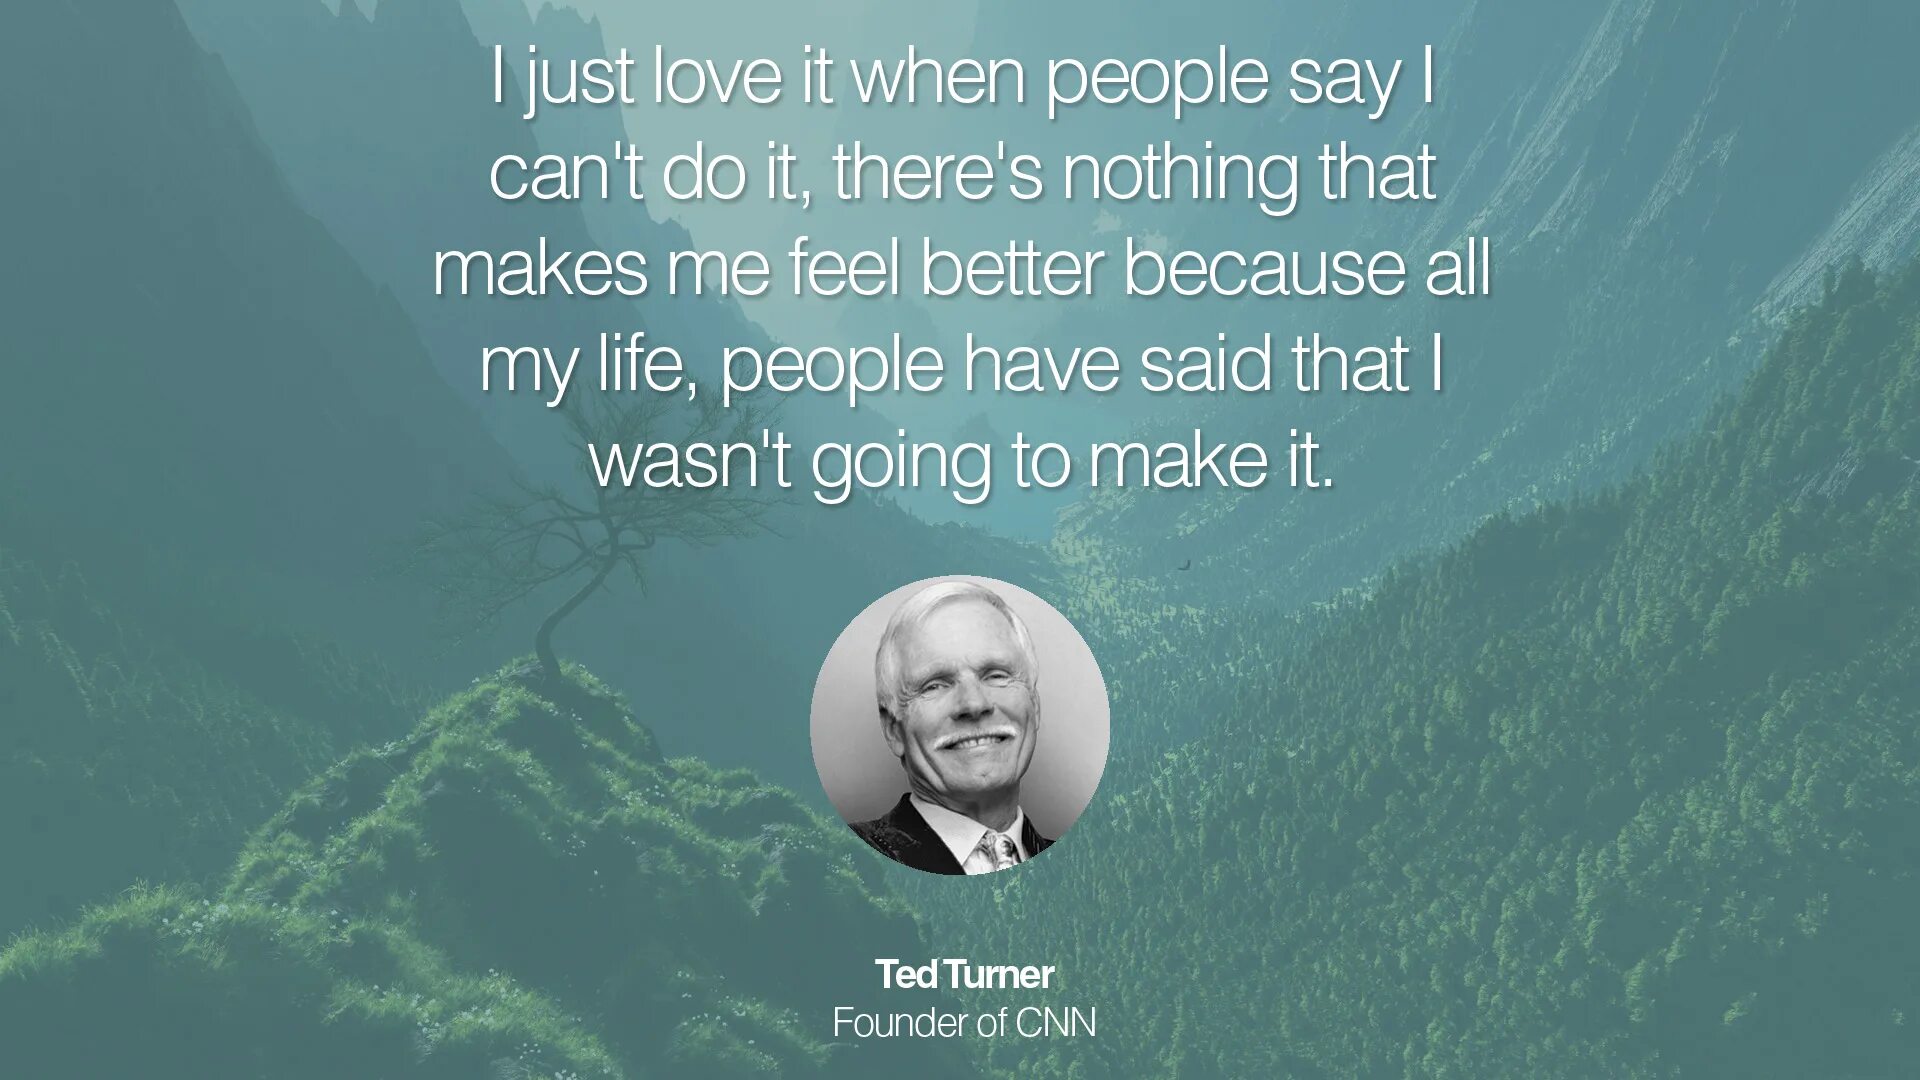 Quotes about Business by famous people. Inspirational quotes in English. English Motivation quotes. Inspiration quotes in English. People want to live in an